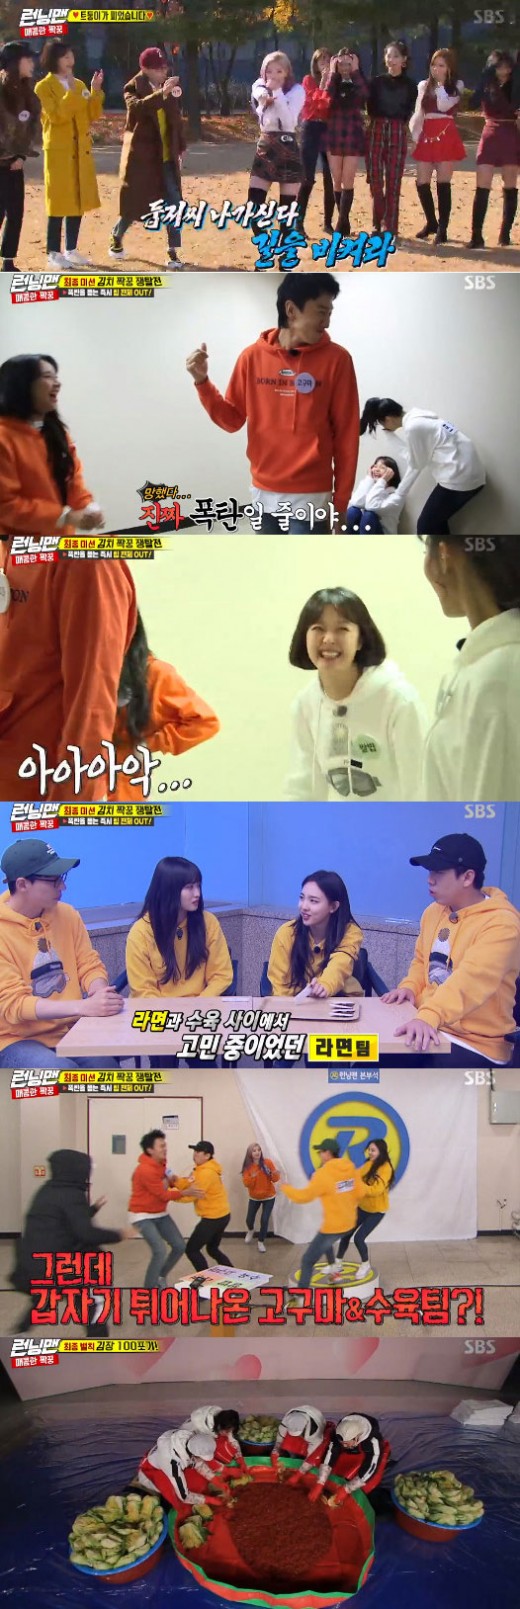 <p> TWICE with kimchi shiny Peek-A-Boo Race from Yoo Jae Suk team to victory.</p><p>2 days SBS ‘Running Man’in the ‘Kim the best of mates Peek-A-Boo find the’Race to decorated the middle TWICE with complete with appearances by eyes.</p><p>Each Kim the best of mates Peek-A-Boo candidate, white rice, potatoes, ramen, training the team is divided into mission through the best shiny Peek-A-Boo hit the team win the Race to failure for a team is a great 100 give to need disciplinary action.</p><p>This day TWICE members with four teams divided into ‘Running Man’members. Can get a hint that the ship is rooted leaves, in order to acquire The Game at random.</p><p>First, ‘standing in line. the Iron sealed The Game’in the first number of the Academic Team Kim Jong Kook is 50 centimeters high in iron peak summertime success plays amazing as a 1 for and meanwhile, in the Leaf acquire. The second is the ‘coffee to get the retort’ mission. Mouth to make a lot of the biggest retort to feed the team win The Game. This is The Game in the Yam team, Lee Kwang-Soo is a large retort to put in your mouth, successful, active, and learning is rooted leaves were scored. Third The Game is a pig to wrestle with people or alone 7 people out and active and eye-catching. After training, team pig wrestling to win. The winning team is placed the focal leaf as a hint to buy.</p><p>Also bombs and menu to attach the members with the middle bomb and throws it immediately, the whole team out situations in a small hold family or sweet potato team, Lee Kwang-Soos name tag removed. In this light the name of the bottom in the Bomb written by was Rice team min “brother bomb file & I”; no-Smoking rooms. Eventually the Rice team is power out.</p><p>Info to avoid active at the end Yoo Jae Suk By Ramen team full 1 for the correct answer if you call and win. Rice team and the academic team, and each team one team is a great 100 give had to do. The day after Rice team Kim 100 points to penalty on winning.</p>